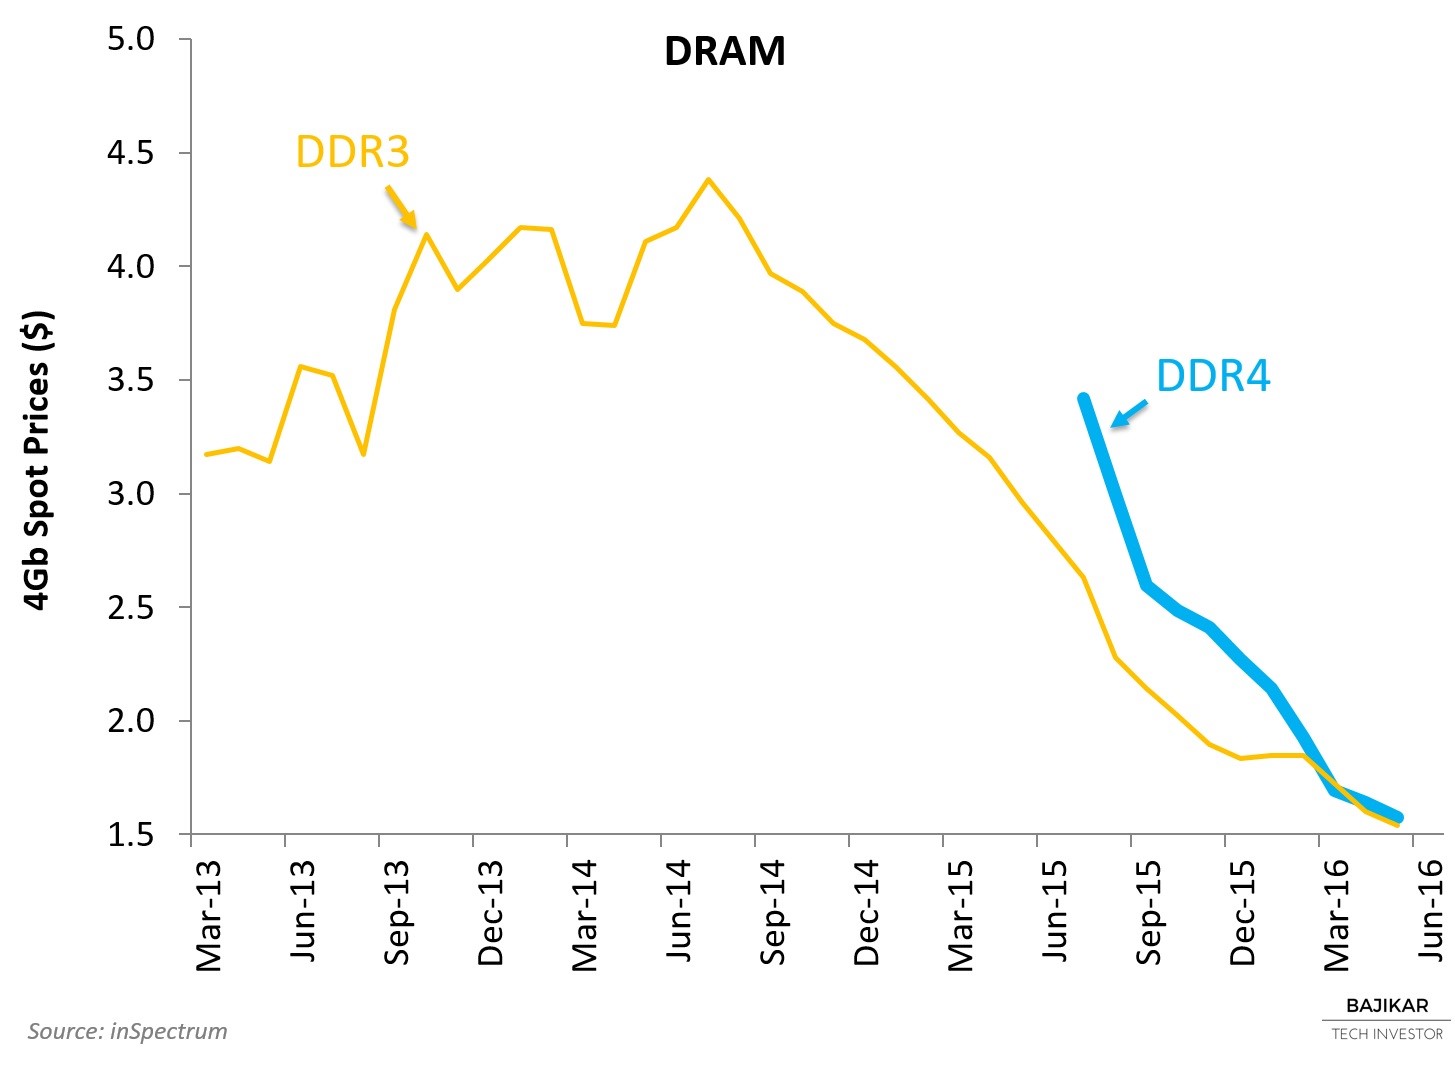 DRAM Spot Prices May 2016